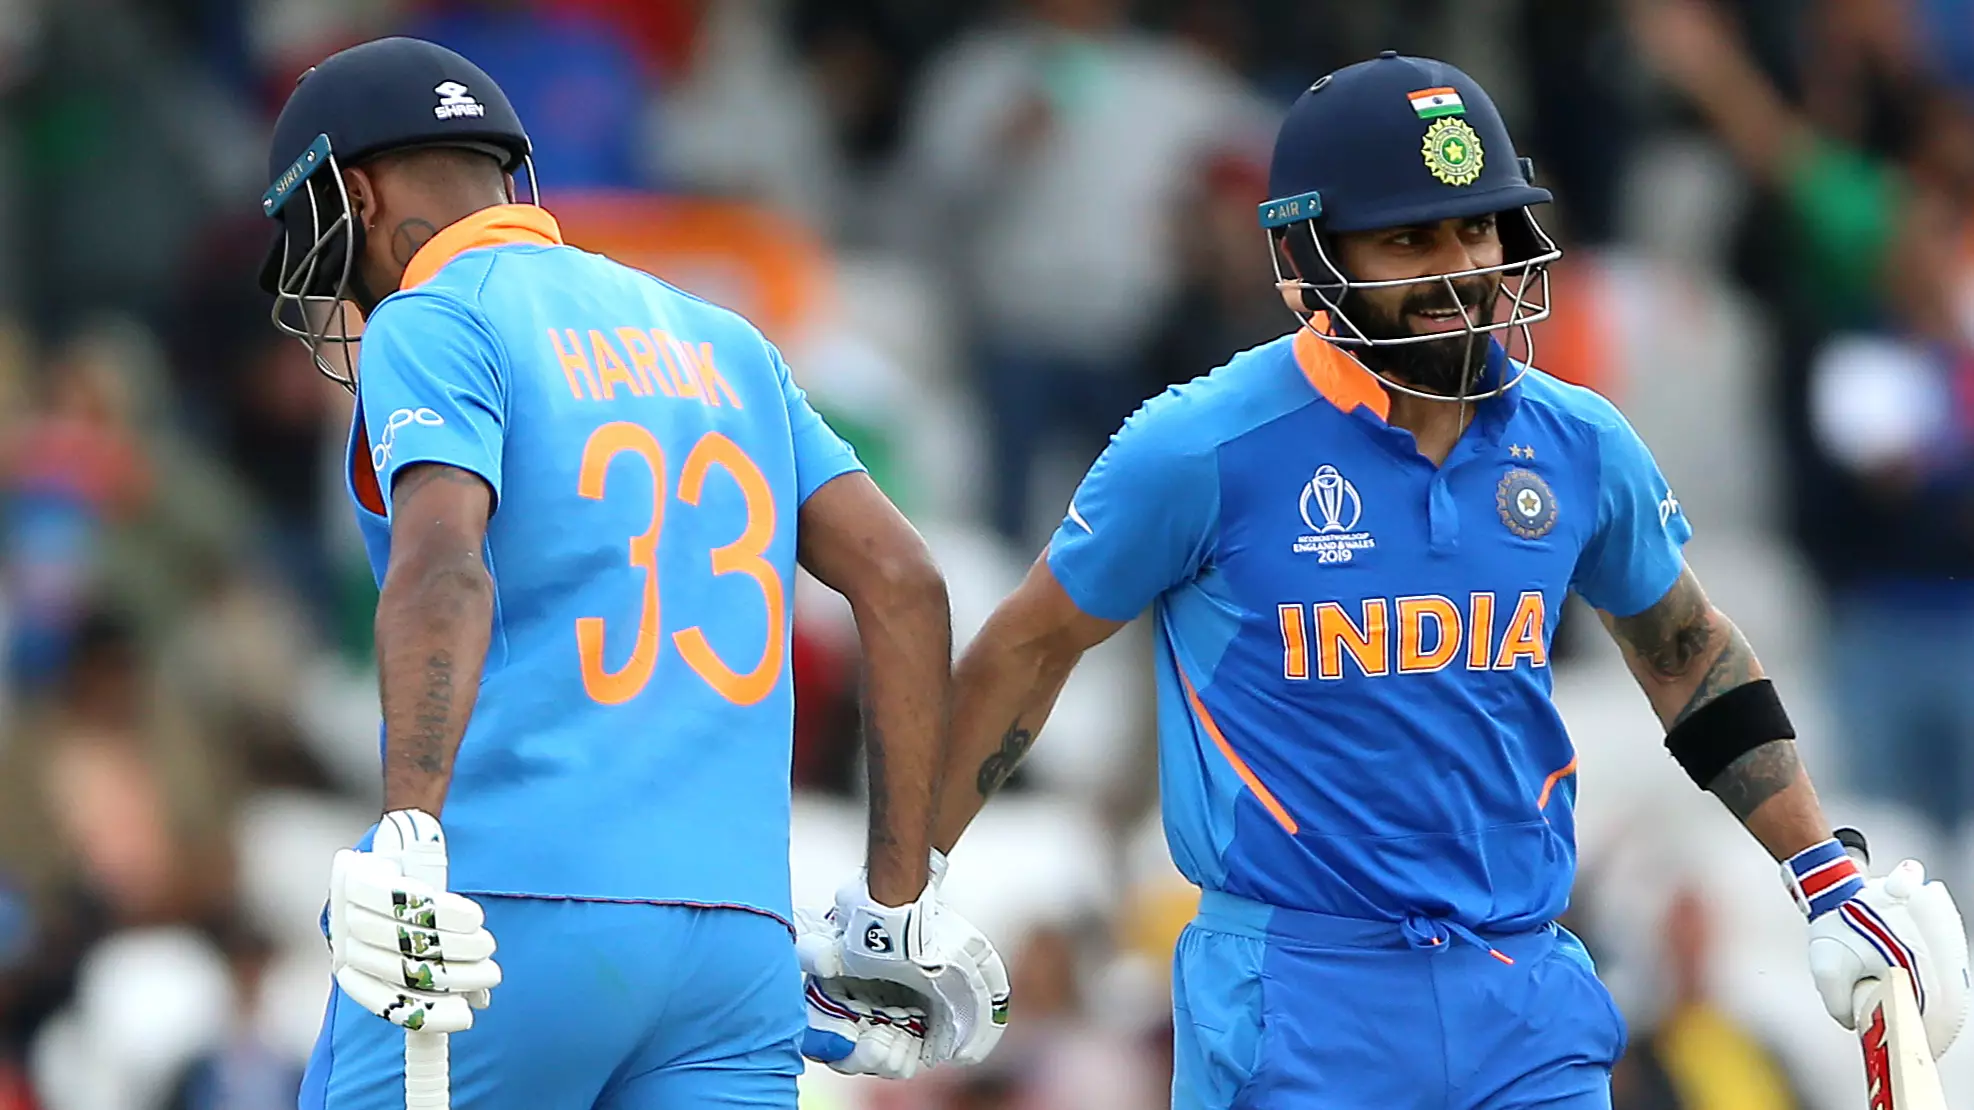 India Vs New Zealand: Live Streaming And TV Channel Info For Cricket World Cup Clash